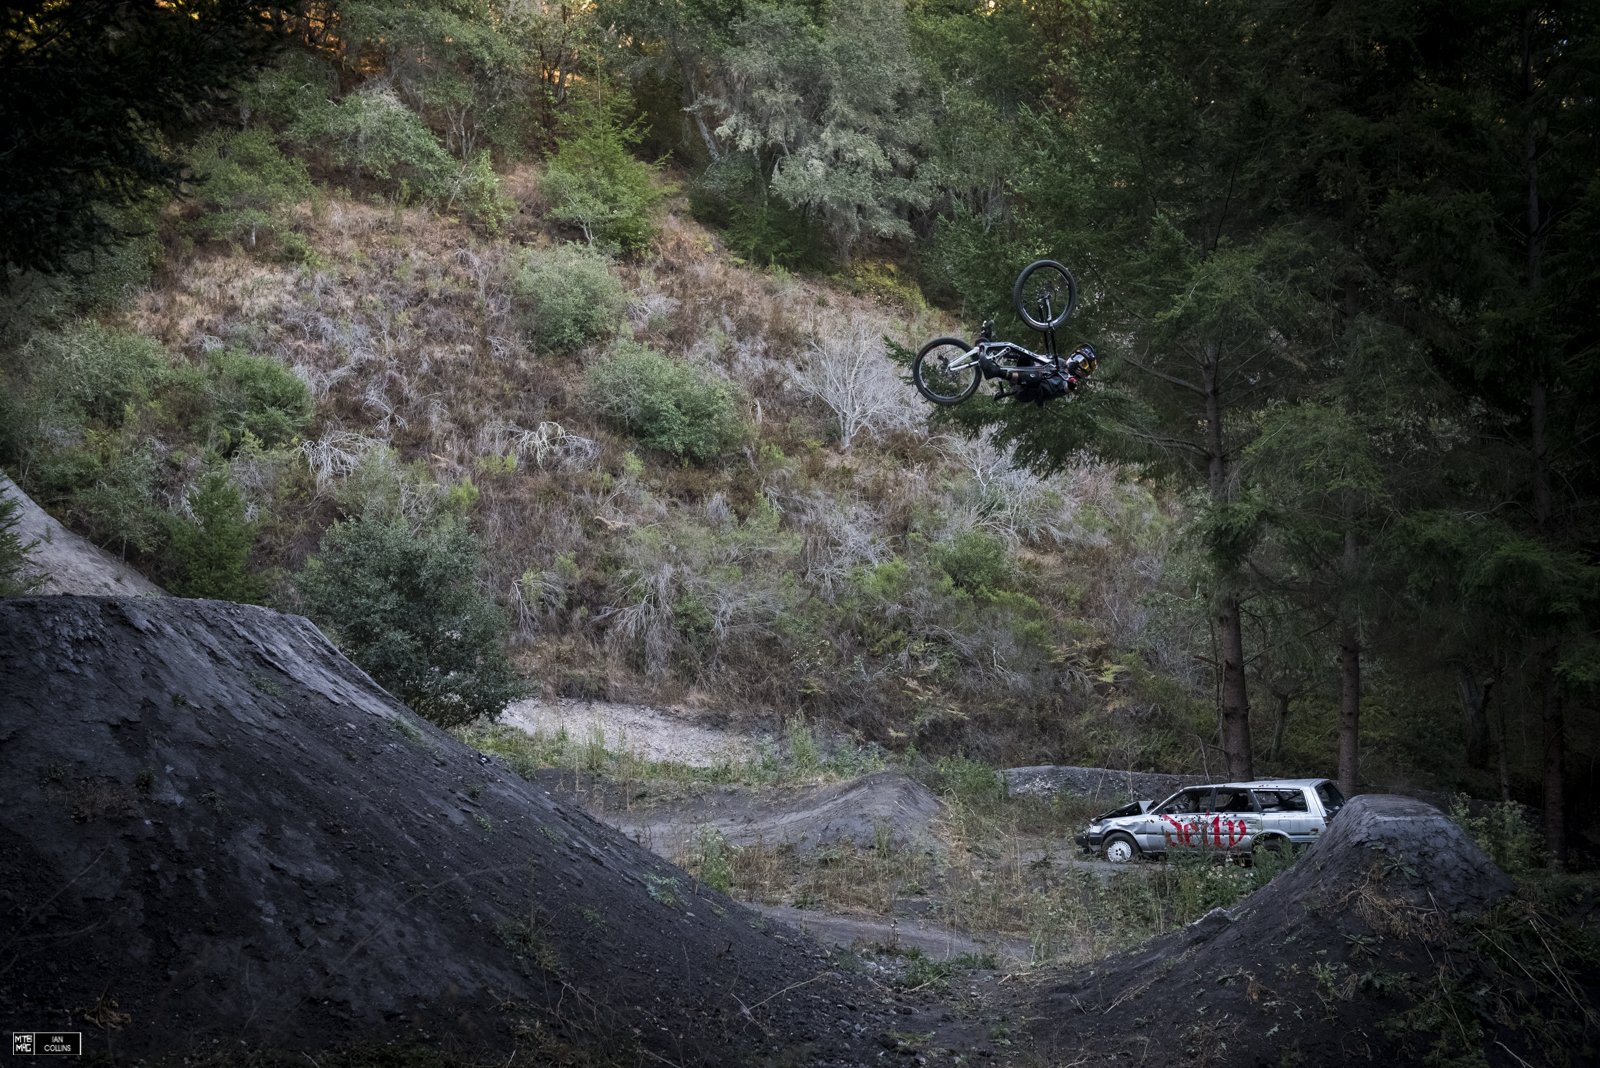 Andreu starting it off with an invert 360 table. It's not often you see that...especially on a DH bike. 